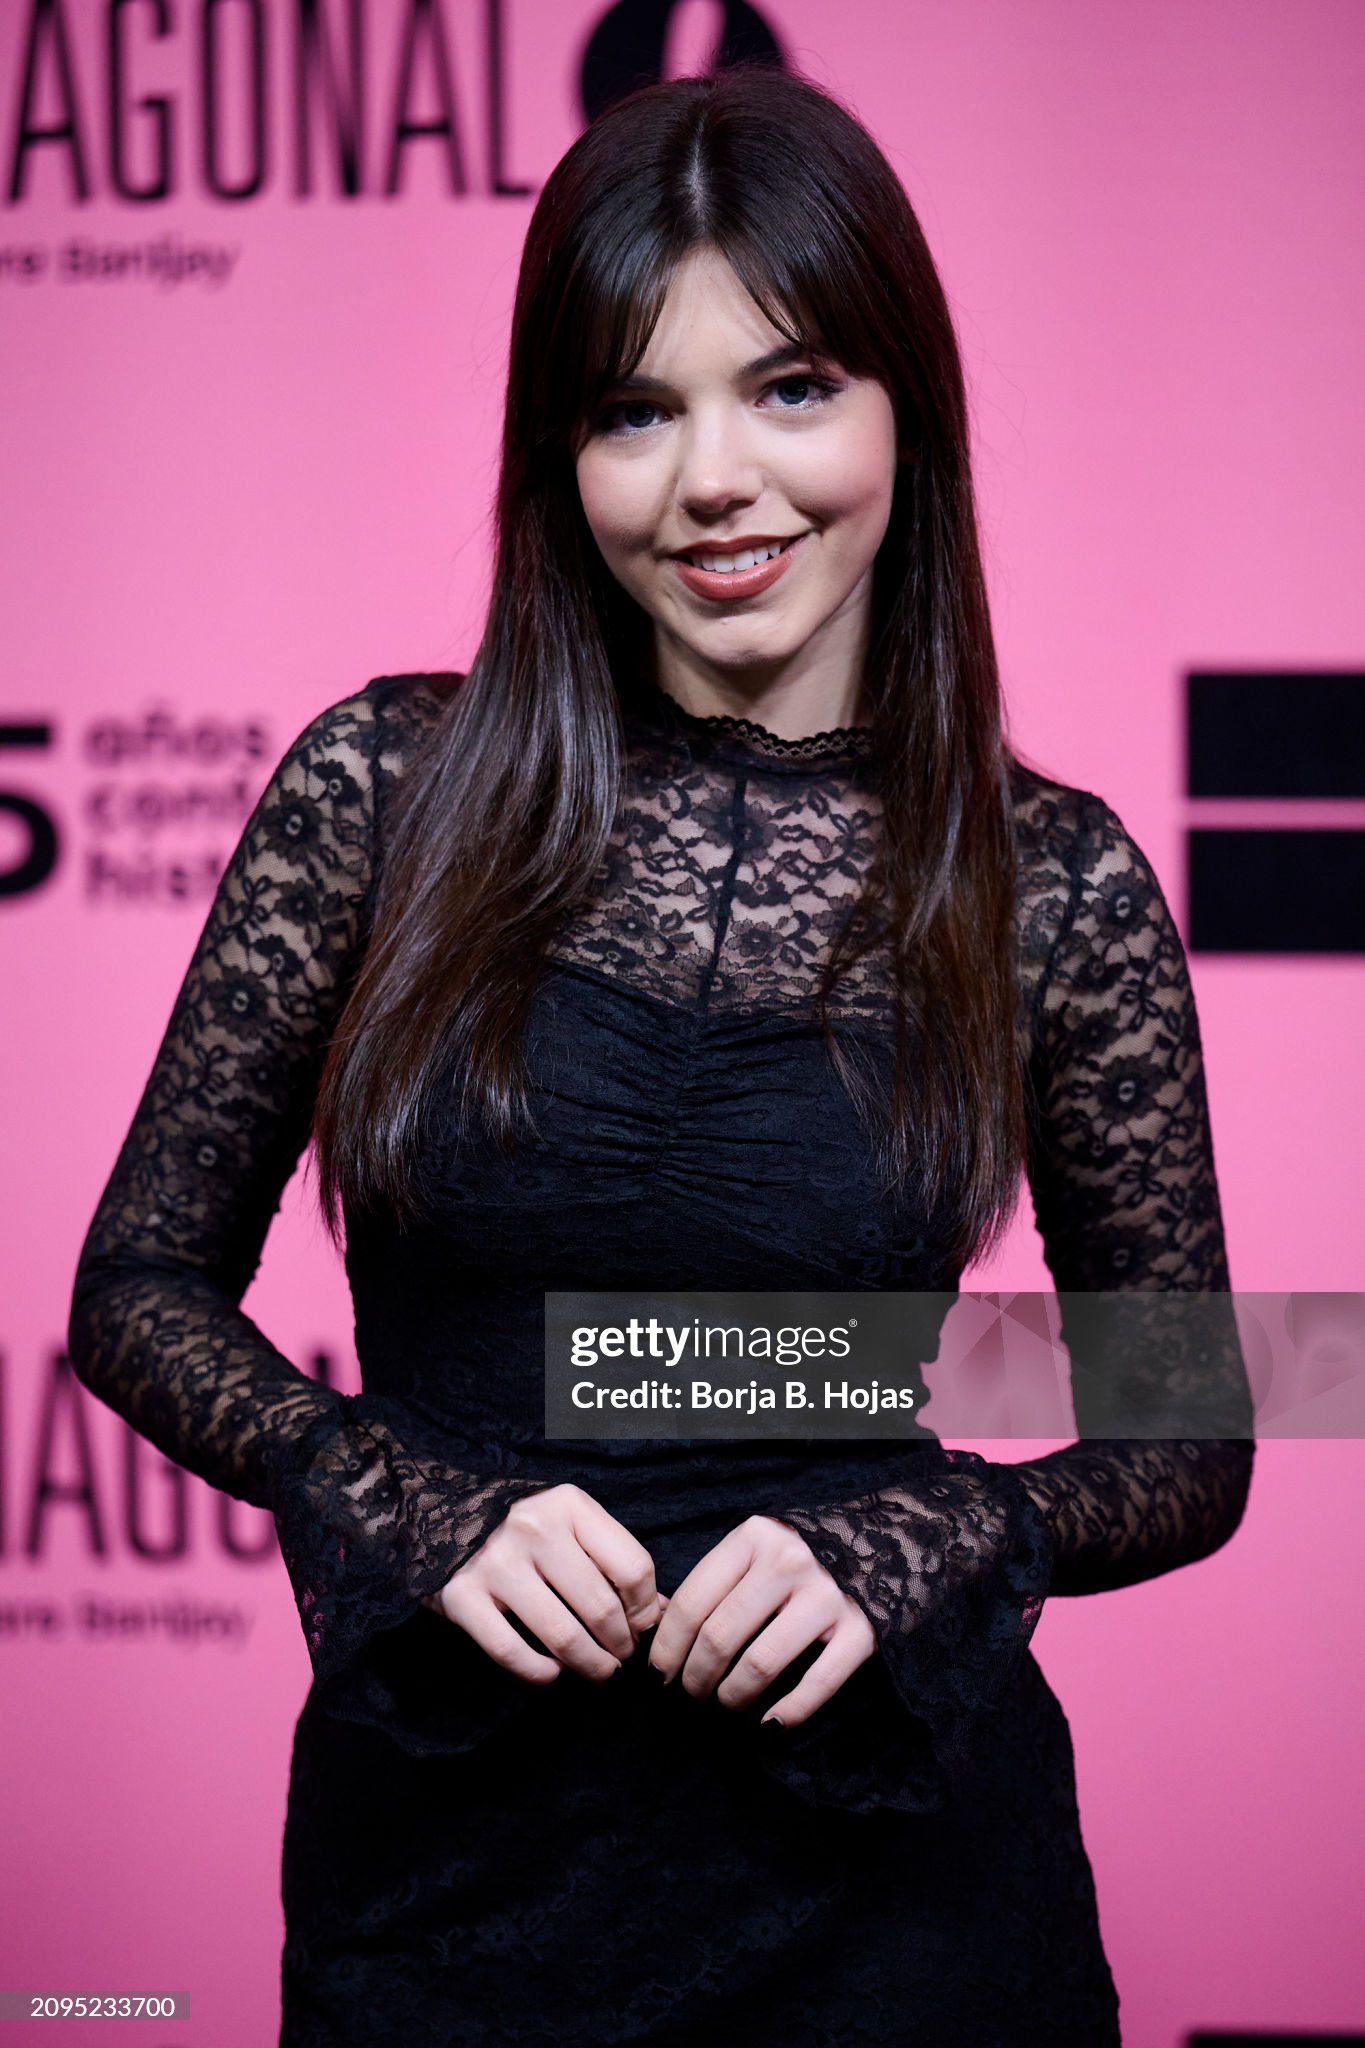 gettyimages-2095233700-2048x2048.jpg